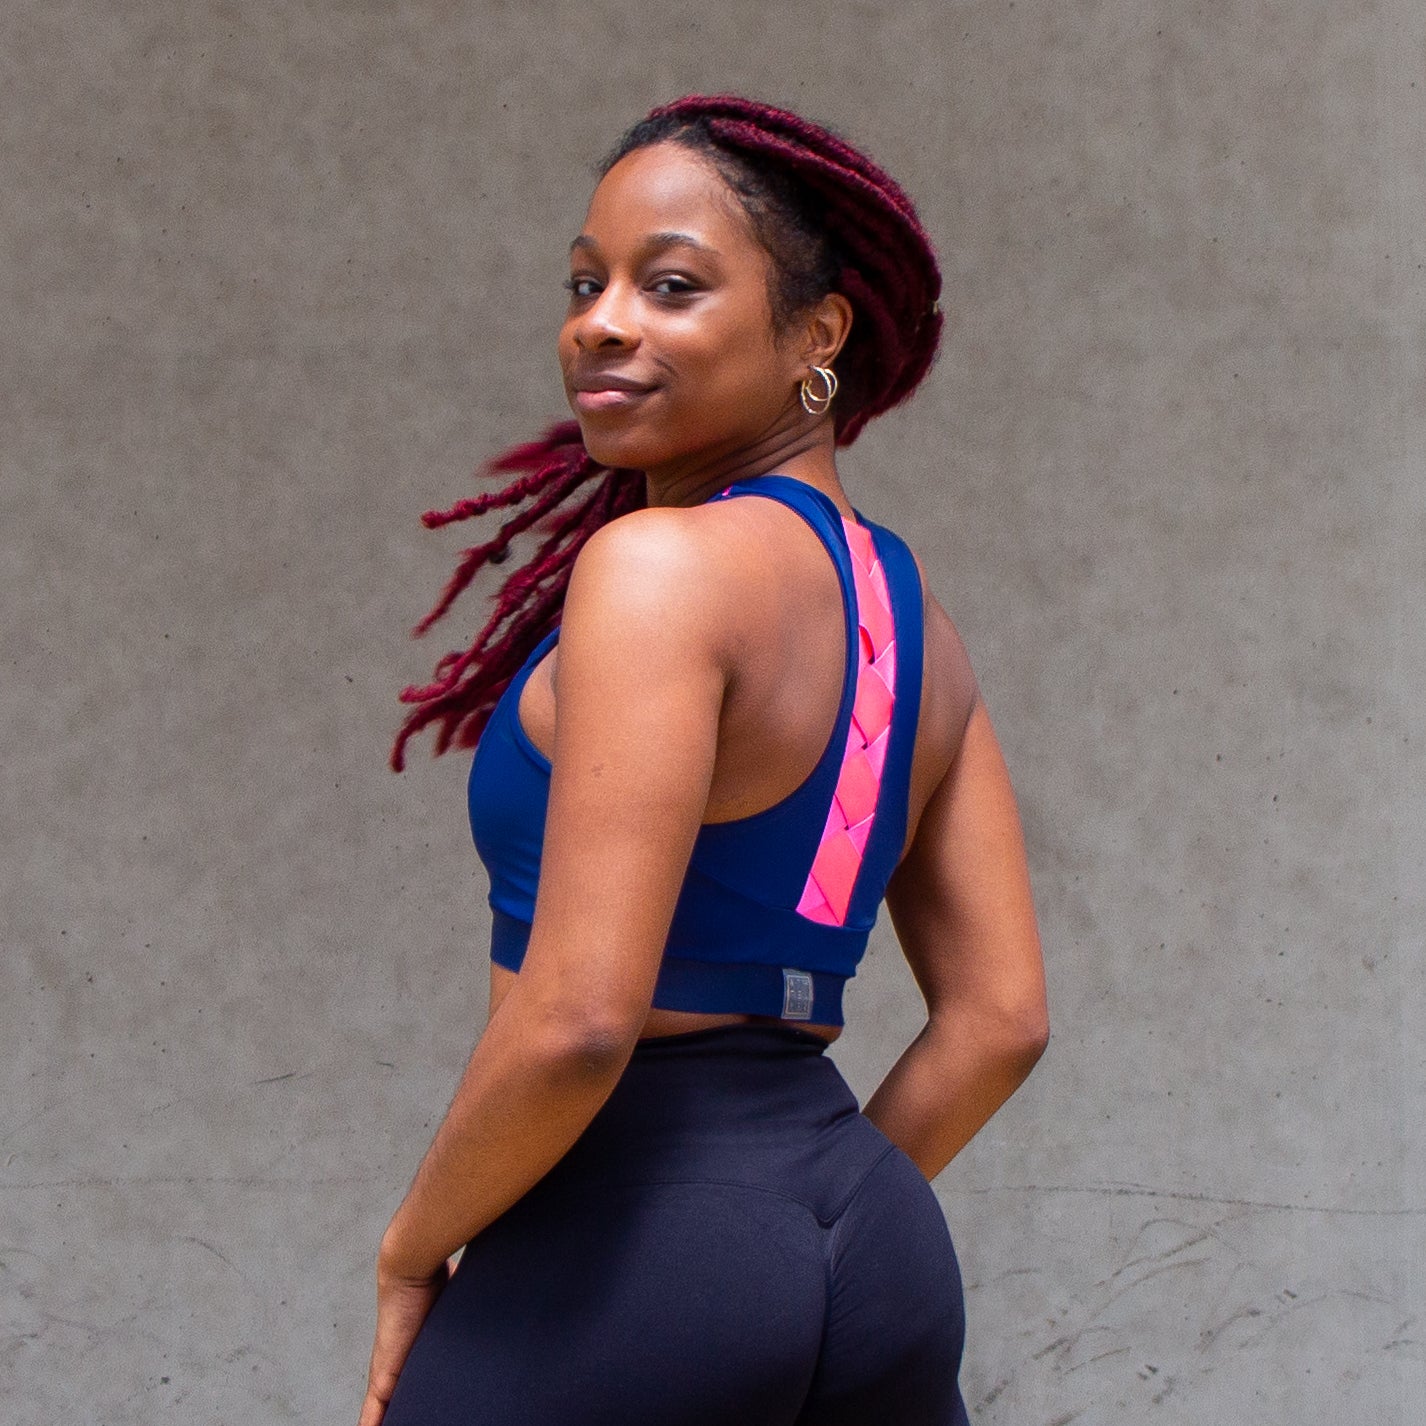 a photo of a black woman flipping her hair while wearing a blue and pink sports bra with a woven elastic detail